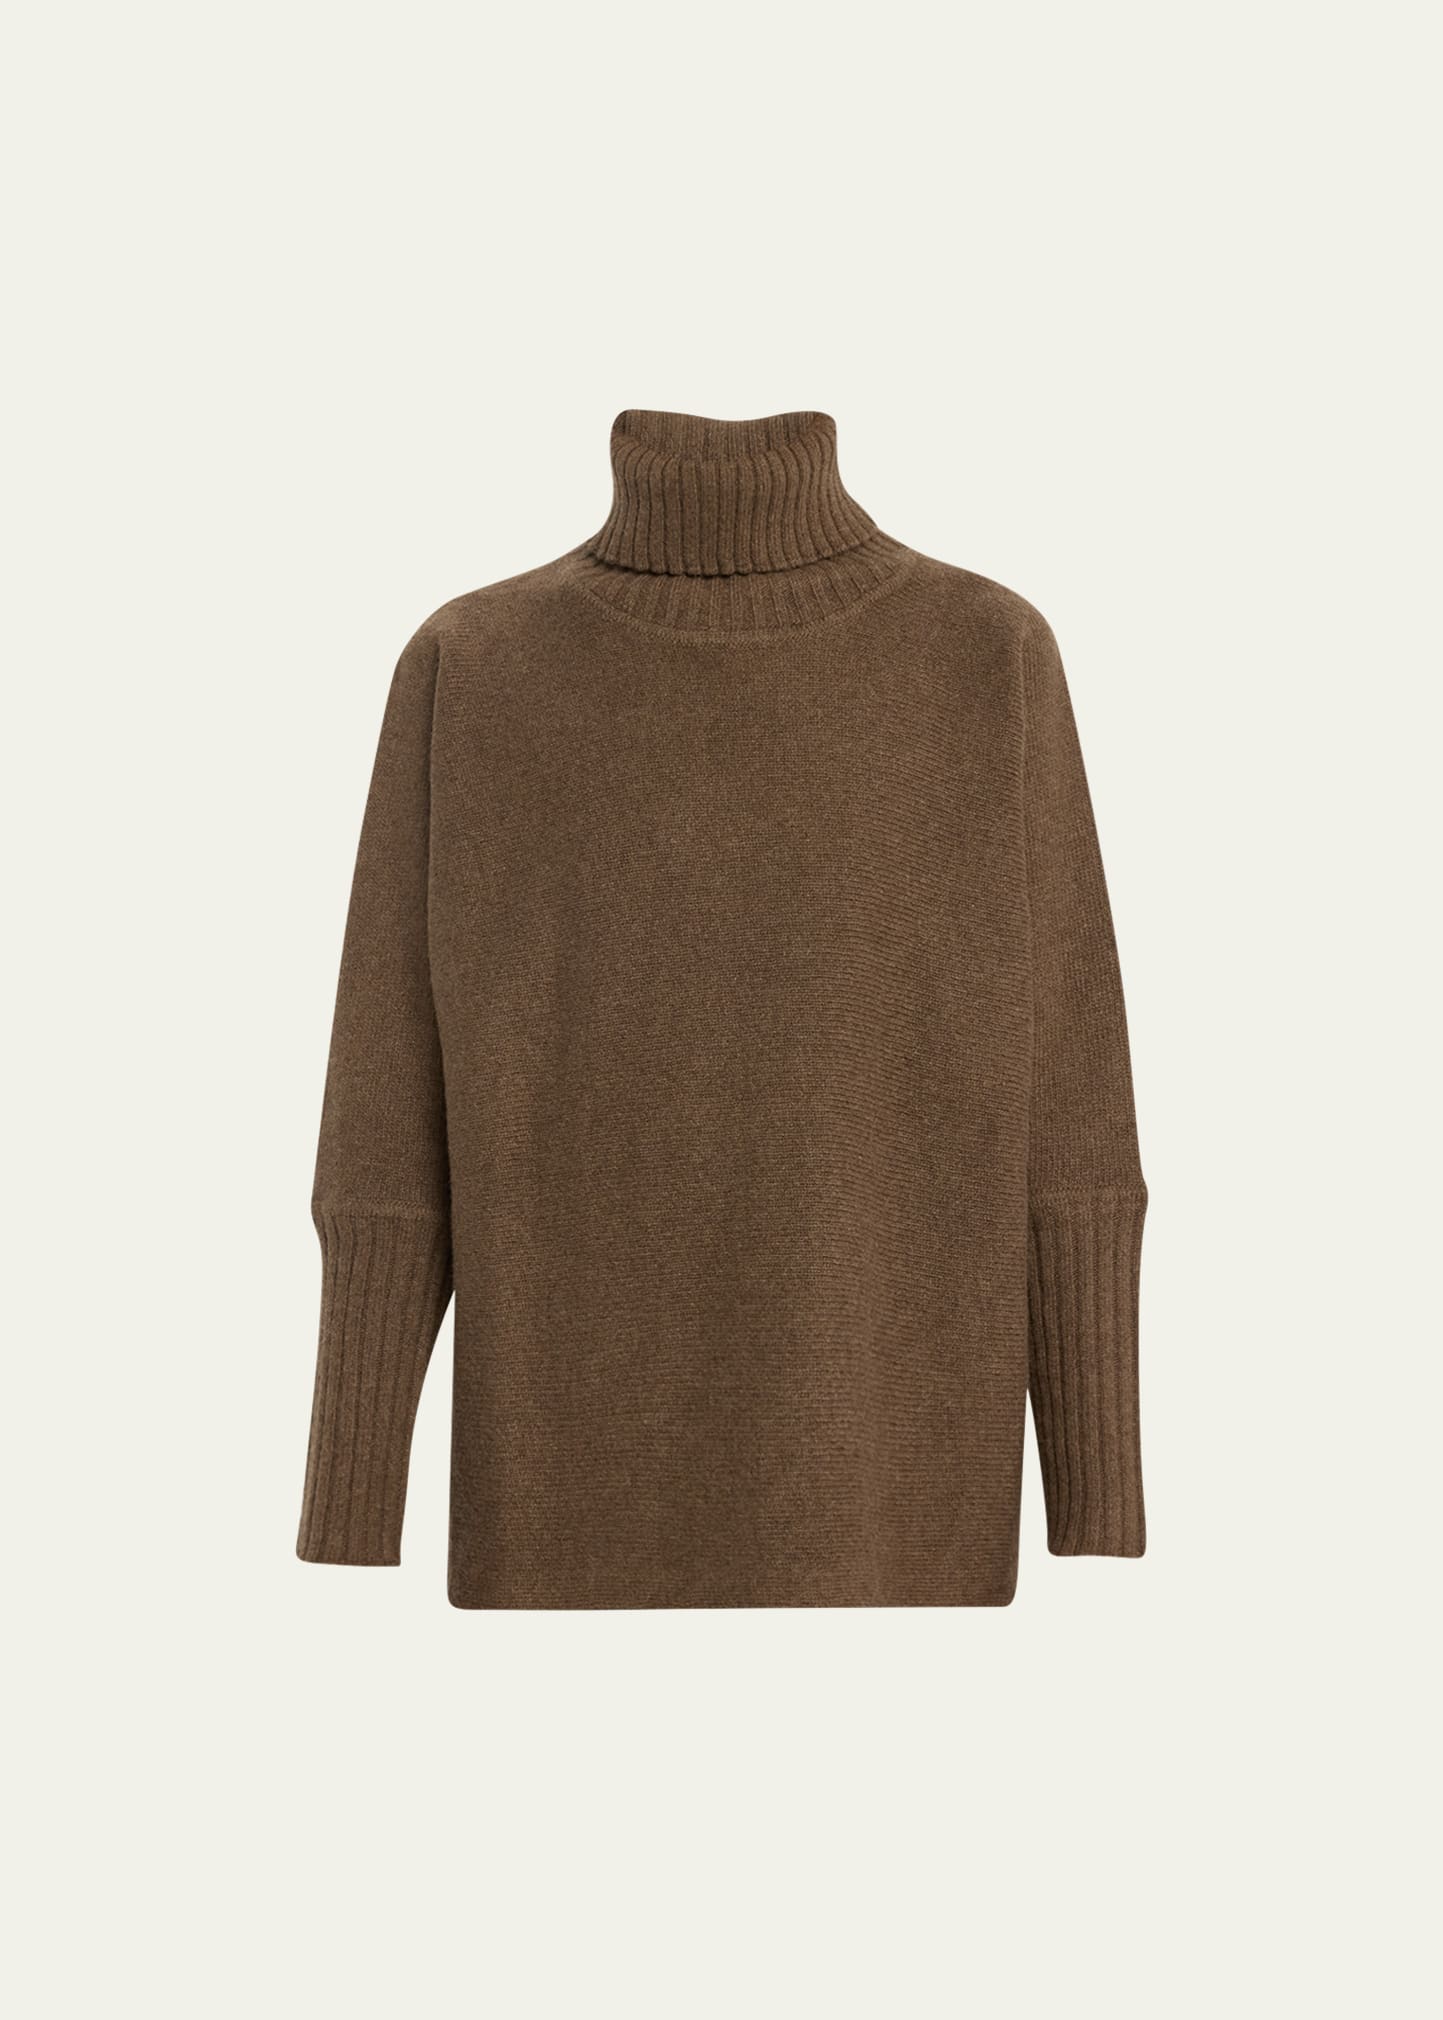 Wool Chunky Textured Knit Long-Sleeve Turtleneck Sweater